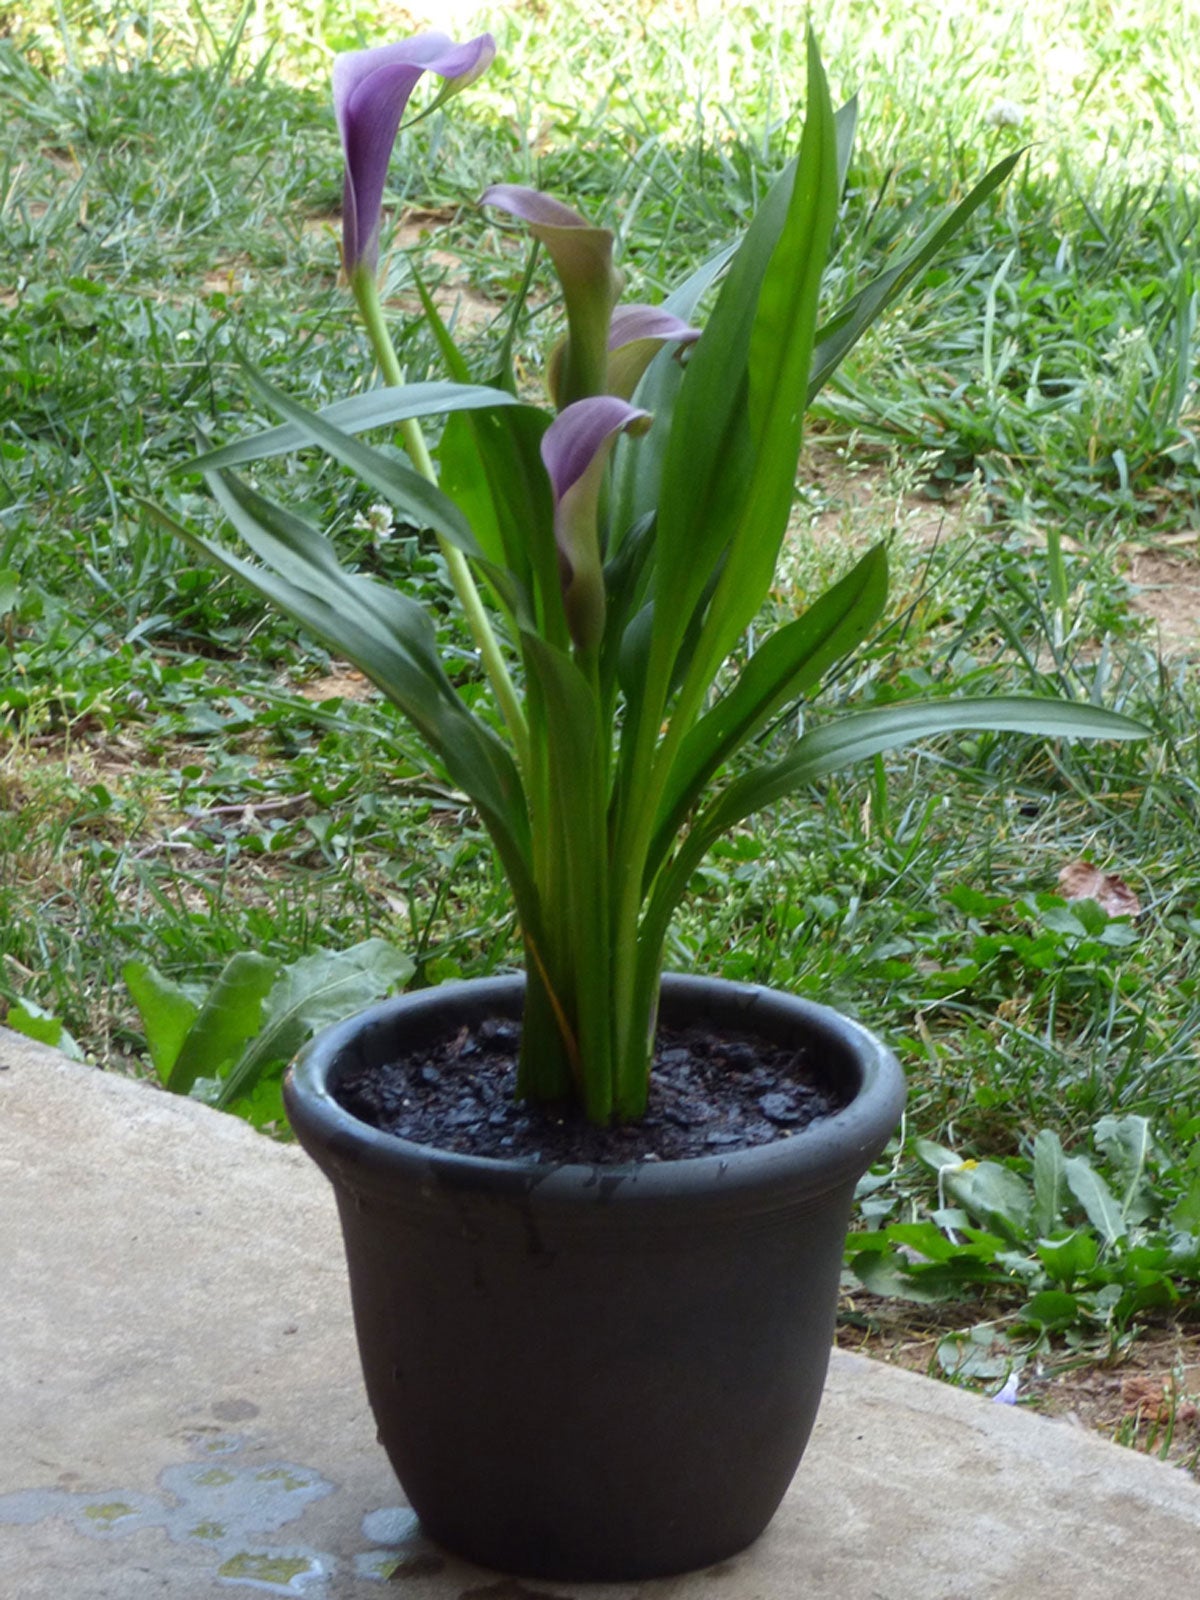 Keeping Potted Calla Lily Plants   How To Grow Calla Lilies In A ...